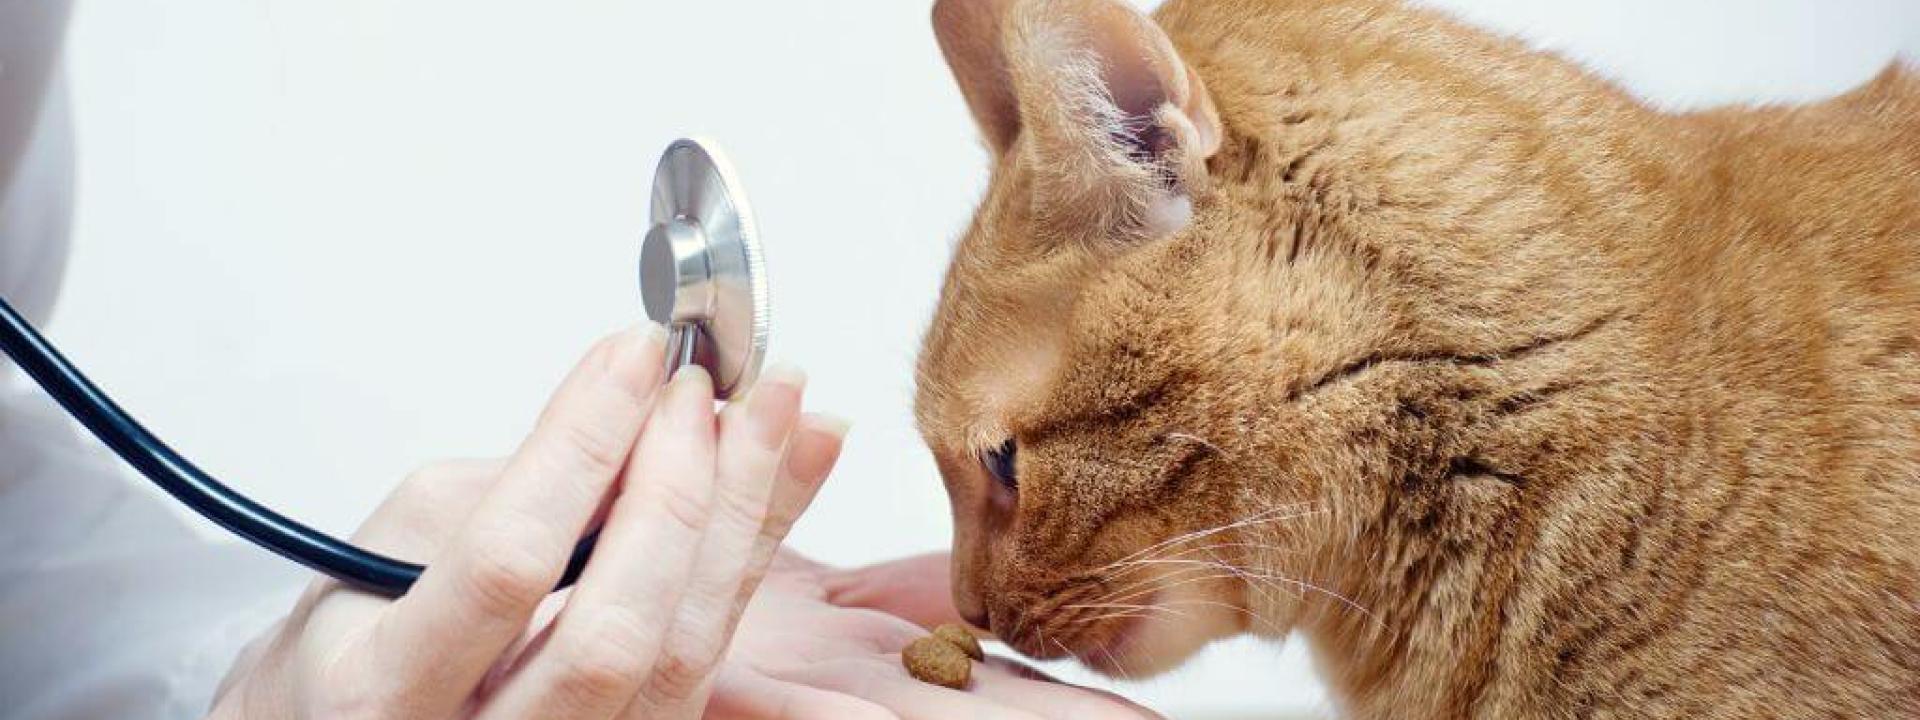 A cat eating a treat out of a veterinarian's hand during a wellness exam.